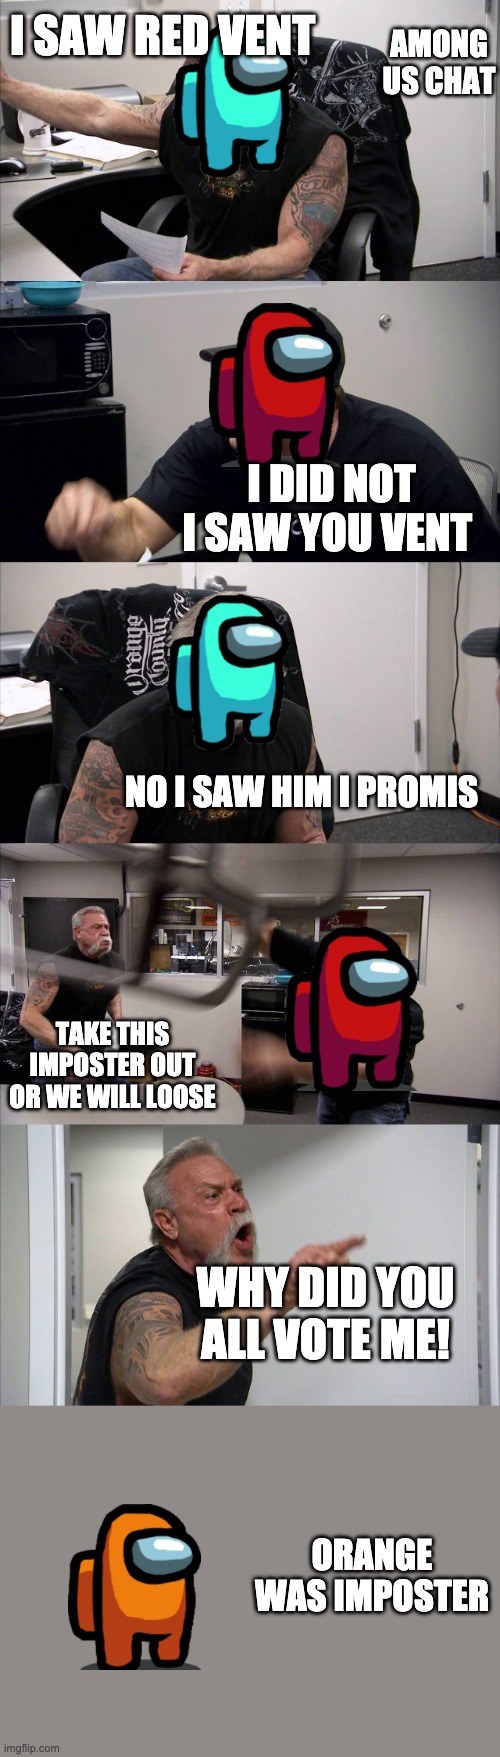 American Chopper Argument | I SAW RED VENT; AMONG US CHAT; I DID NOT I SAW YOU VENT; NO I SAW HIM I PROMIS; TAKE THIS IMPOSTER OUT OR WE WILL LOOSE; WHY DID YOU ALL VOTE ME! ORANGE WAS IMPOSTER | image tagged in memes,american chopper argument | made w/ Imgflip meme maker